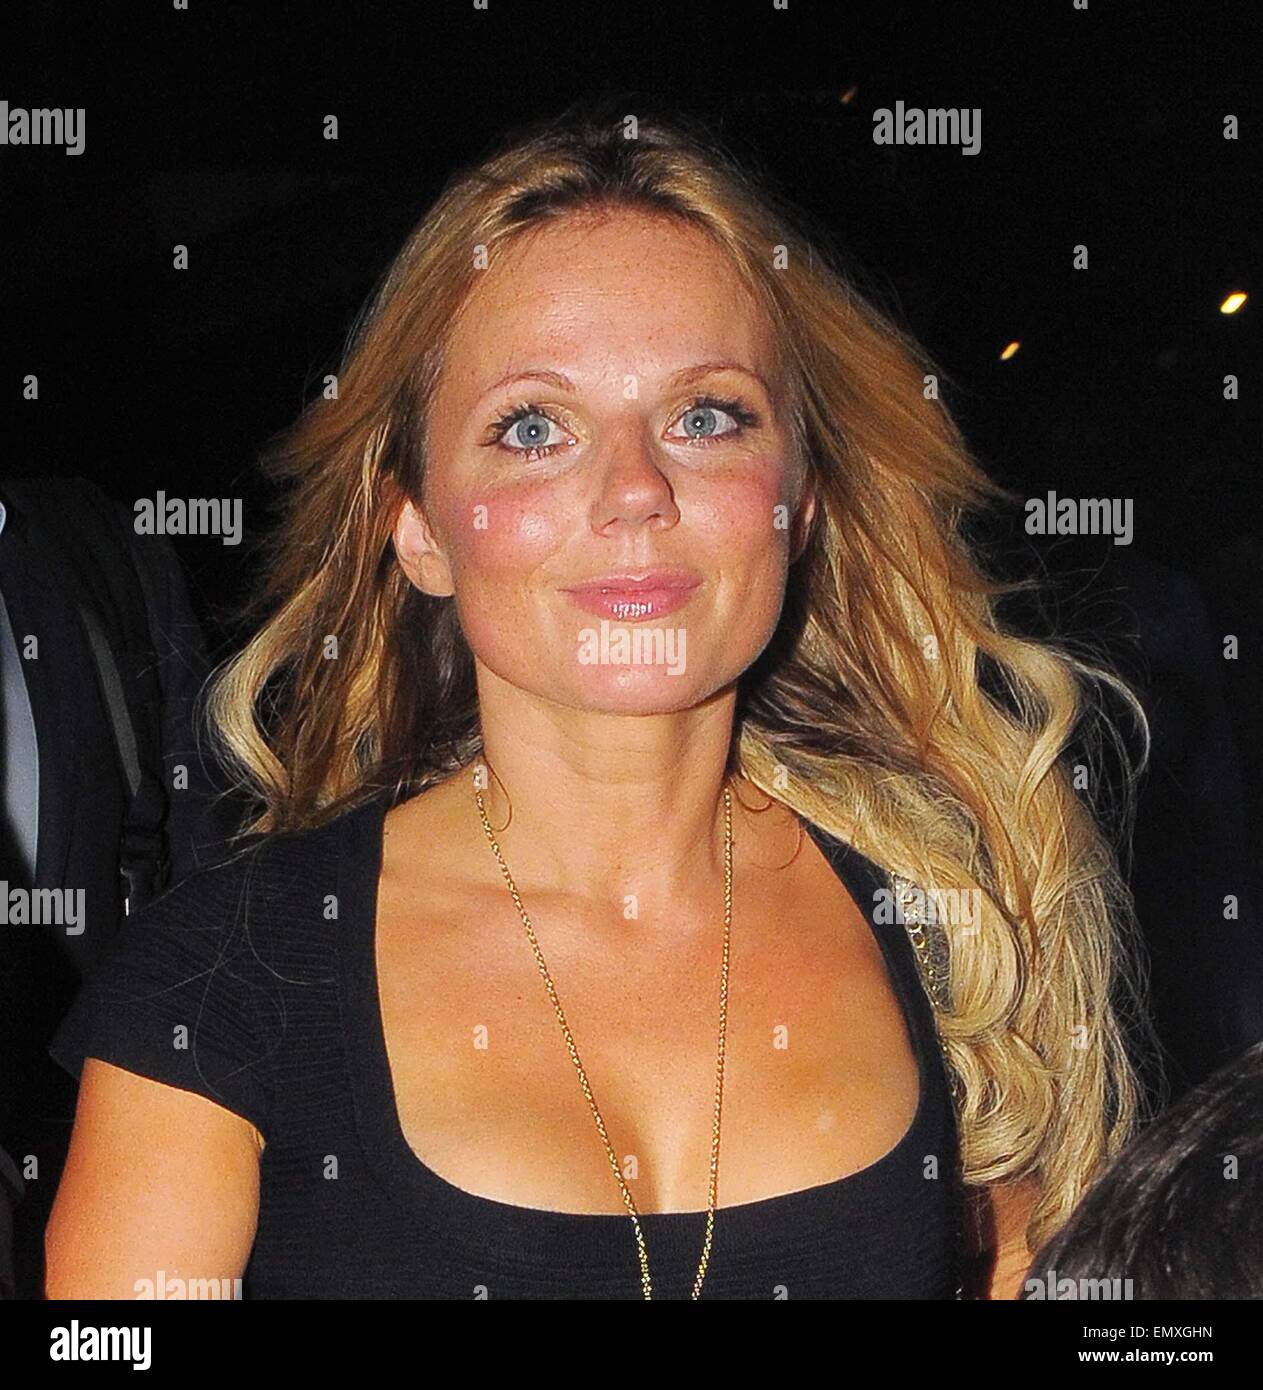 Geri Halliwell High Resolution Stock Photography and Images - Alamy